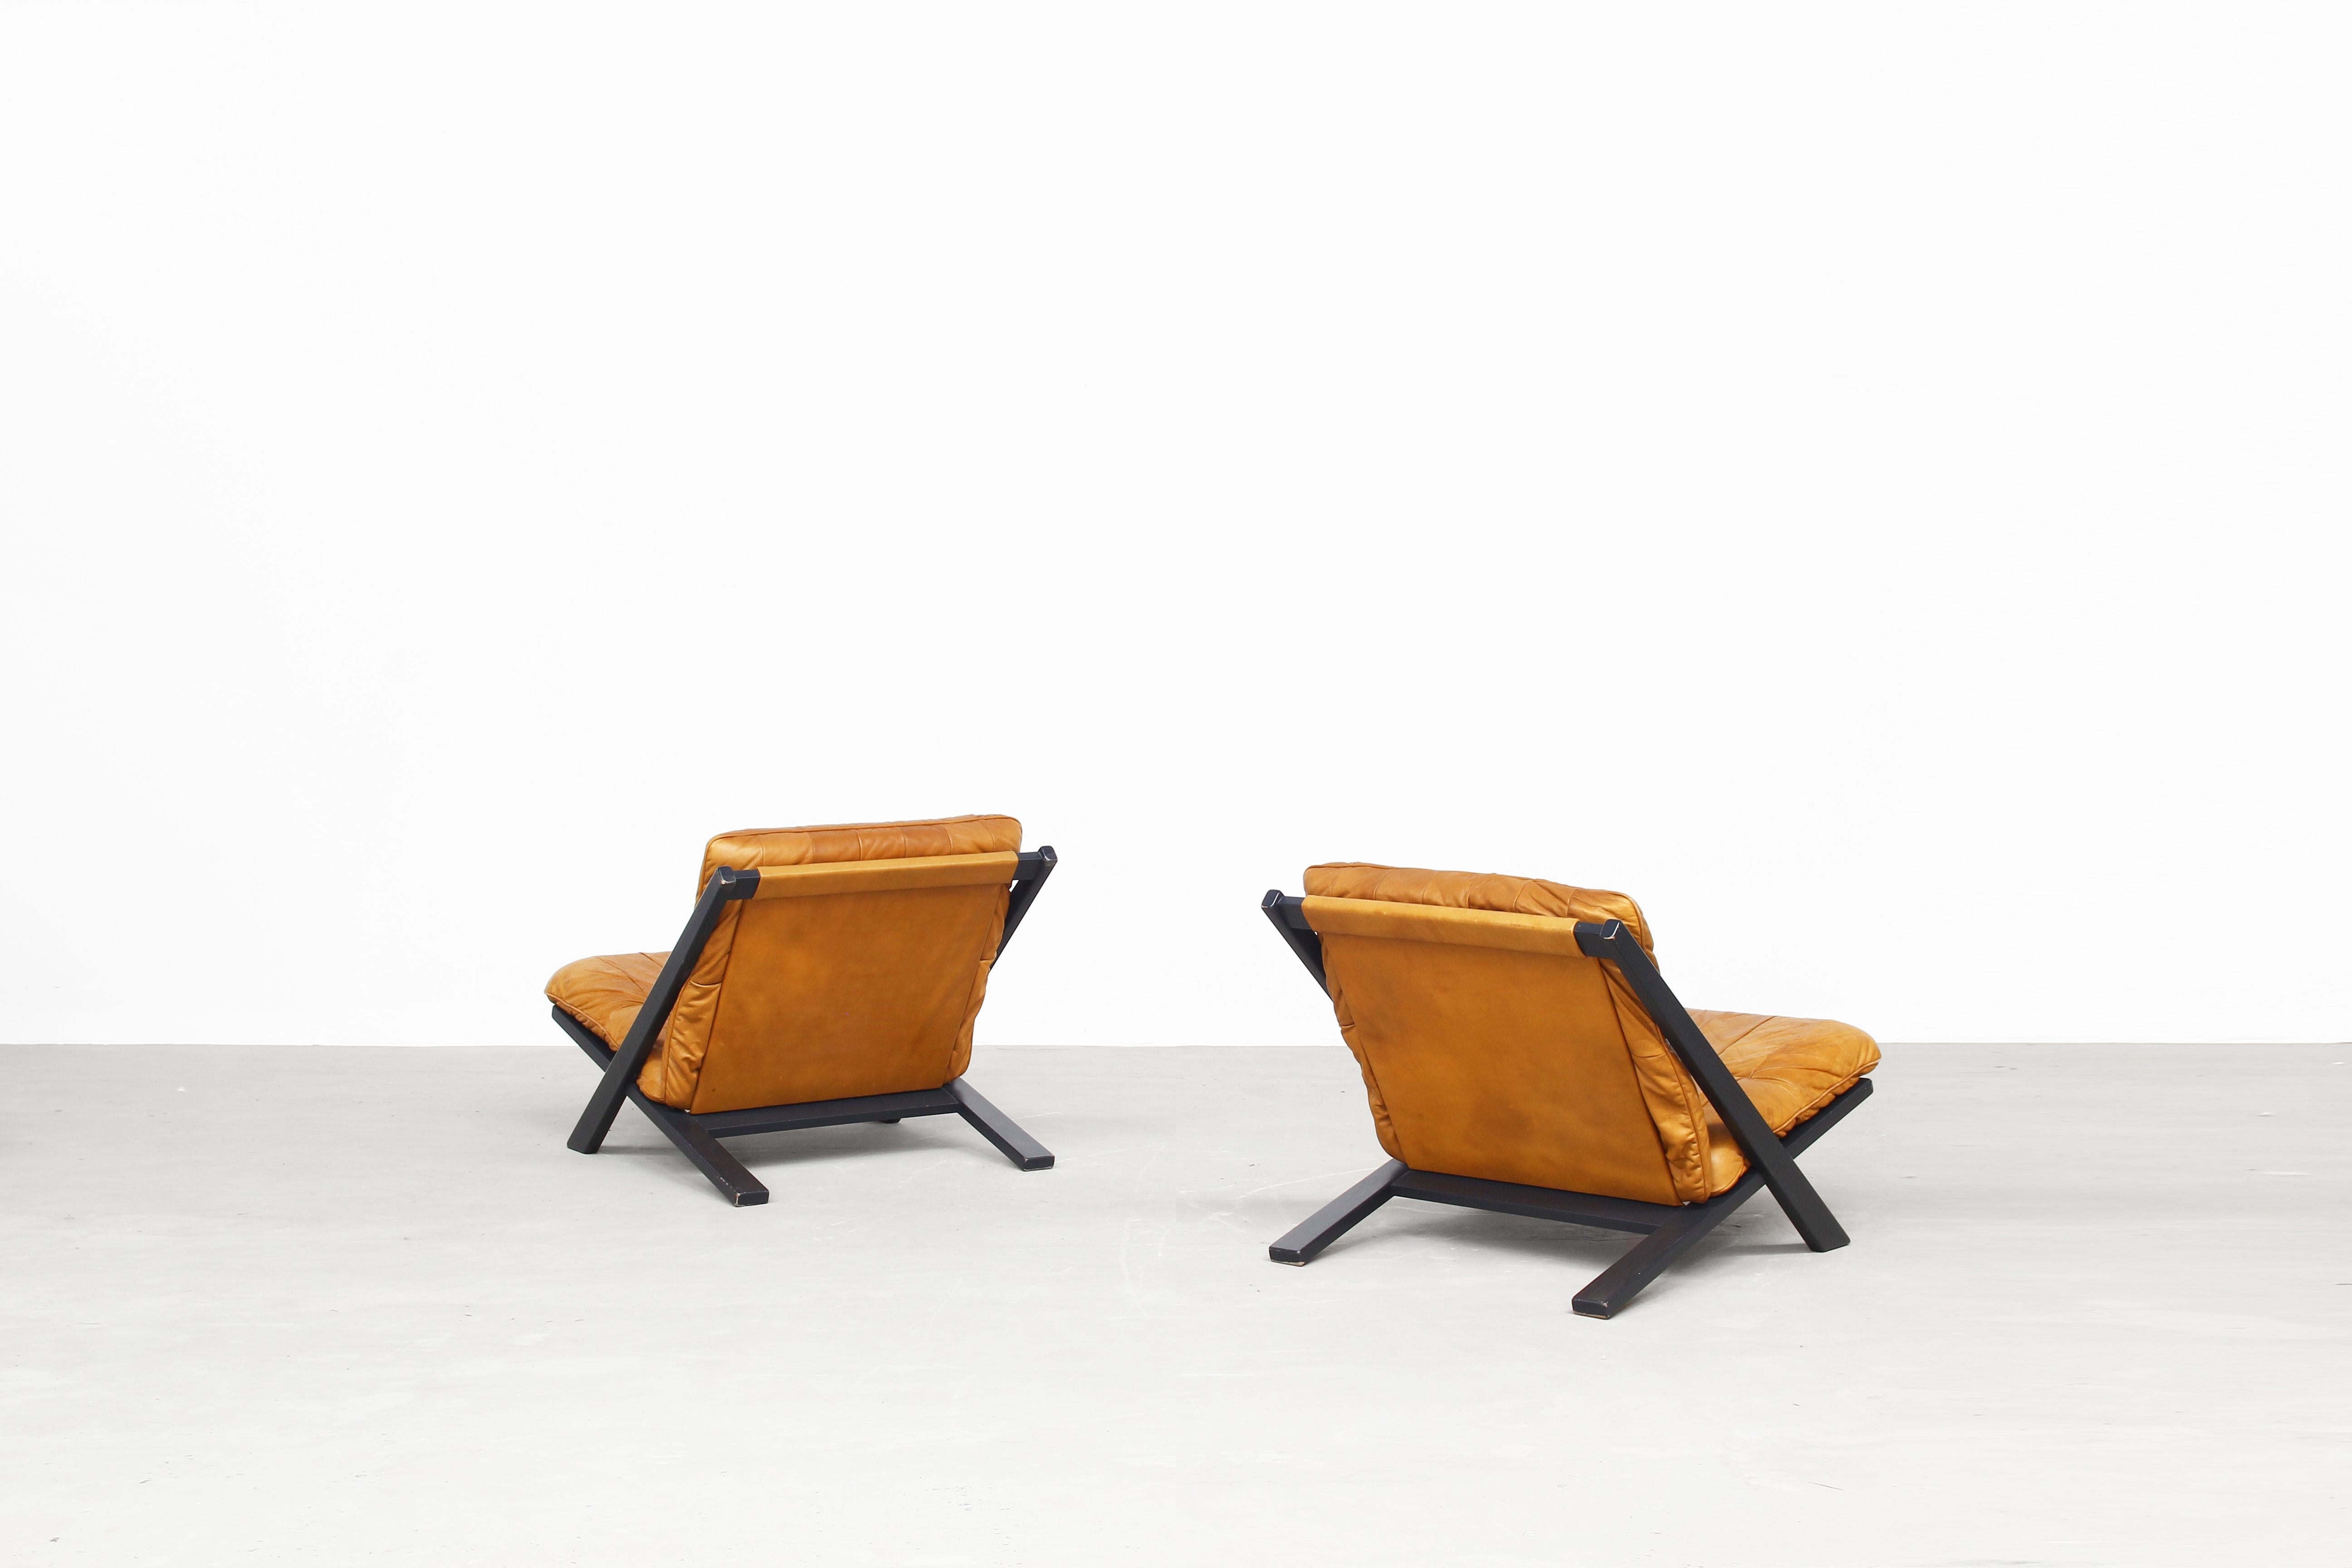 German Pair of Lounge Chairs for De Sede by Ueli Berger, 1970s, Switzerland